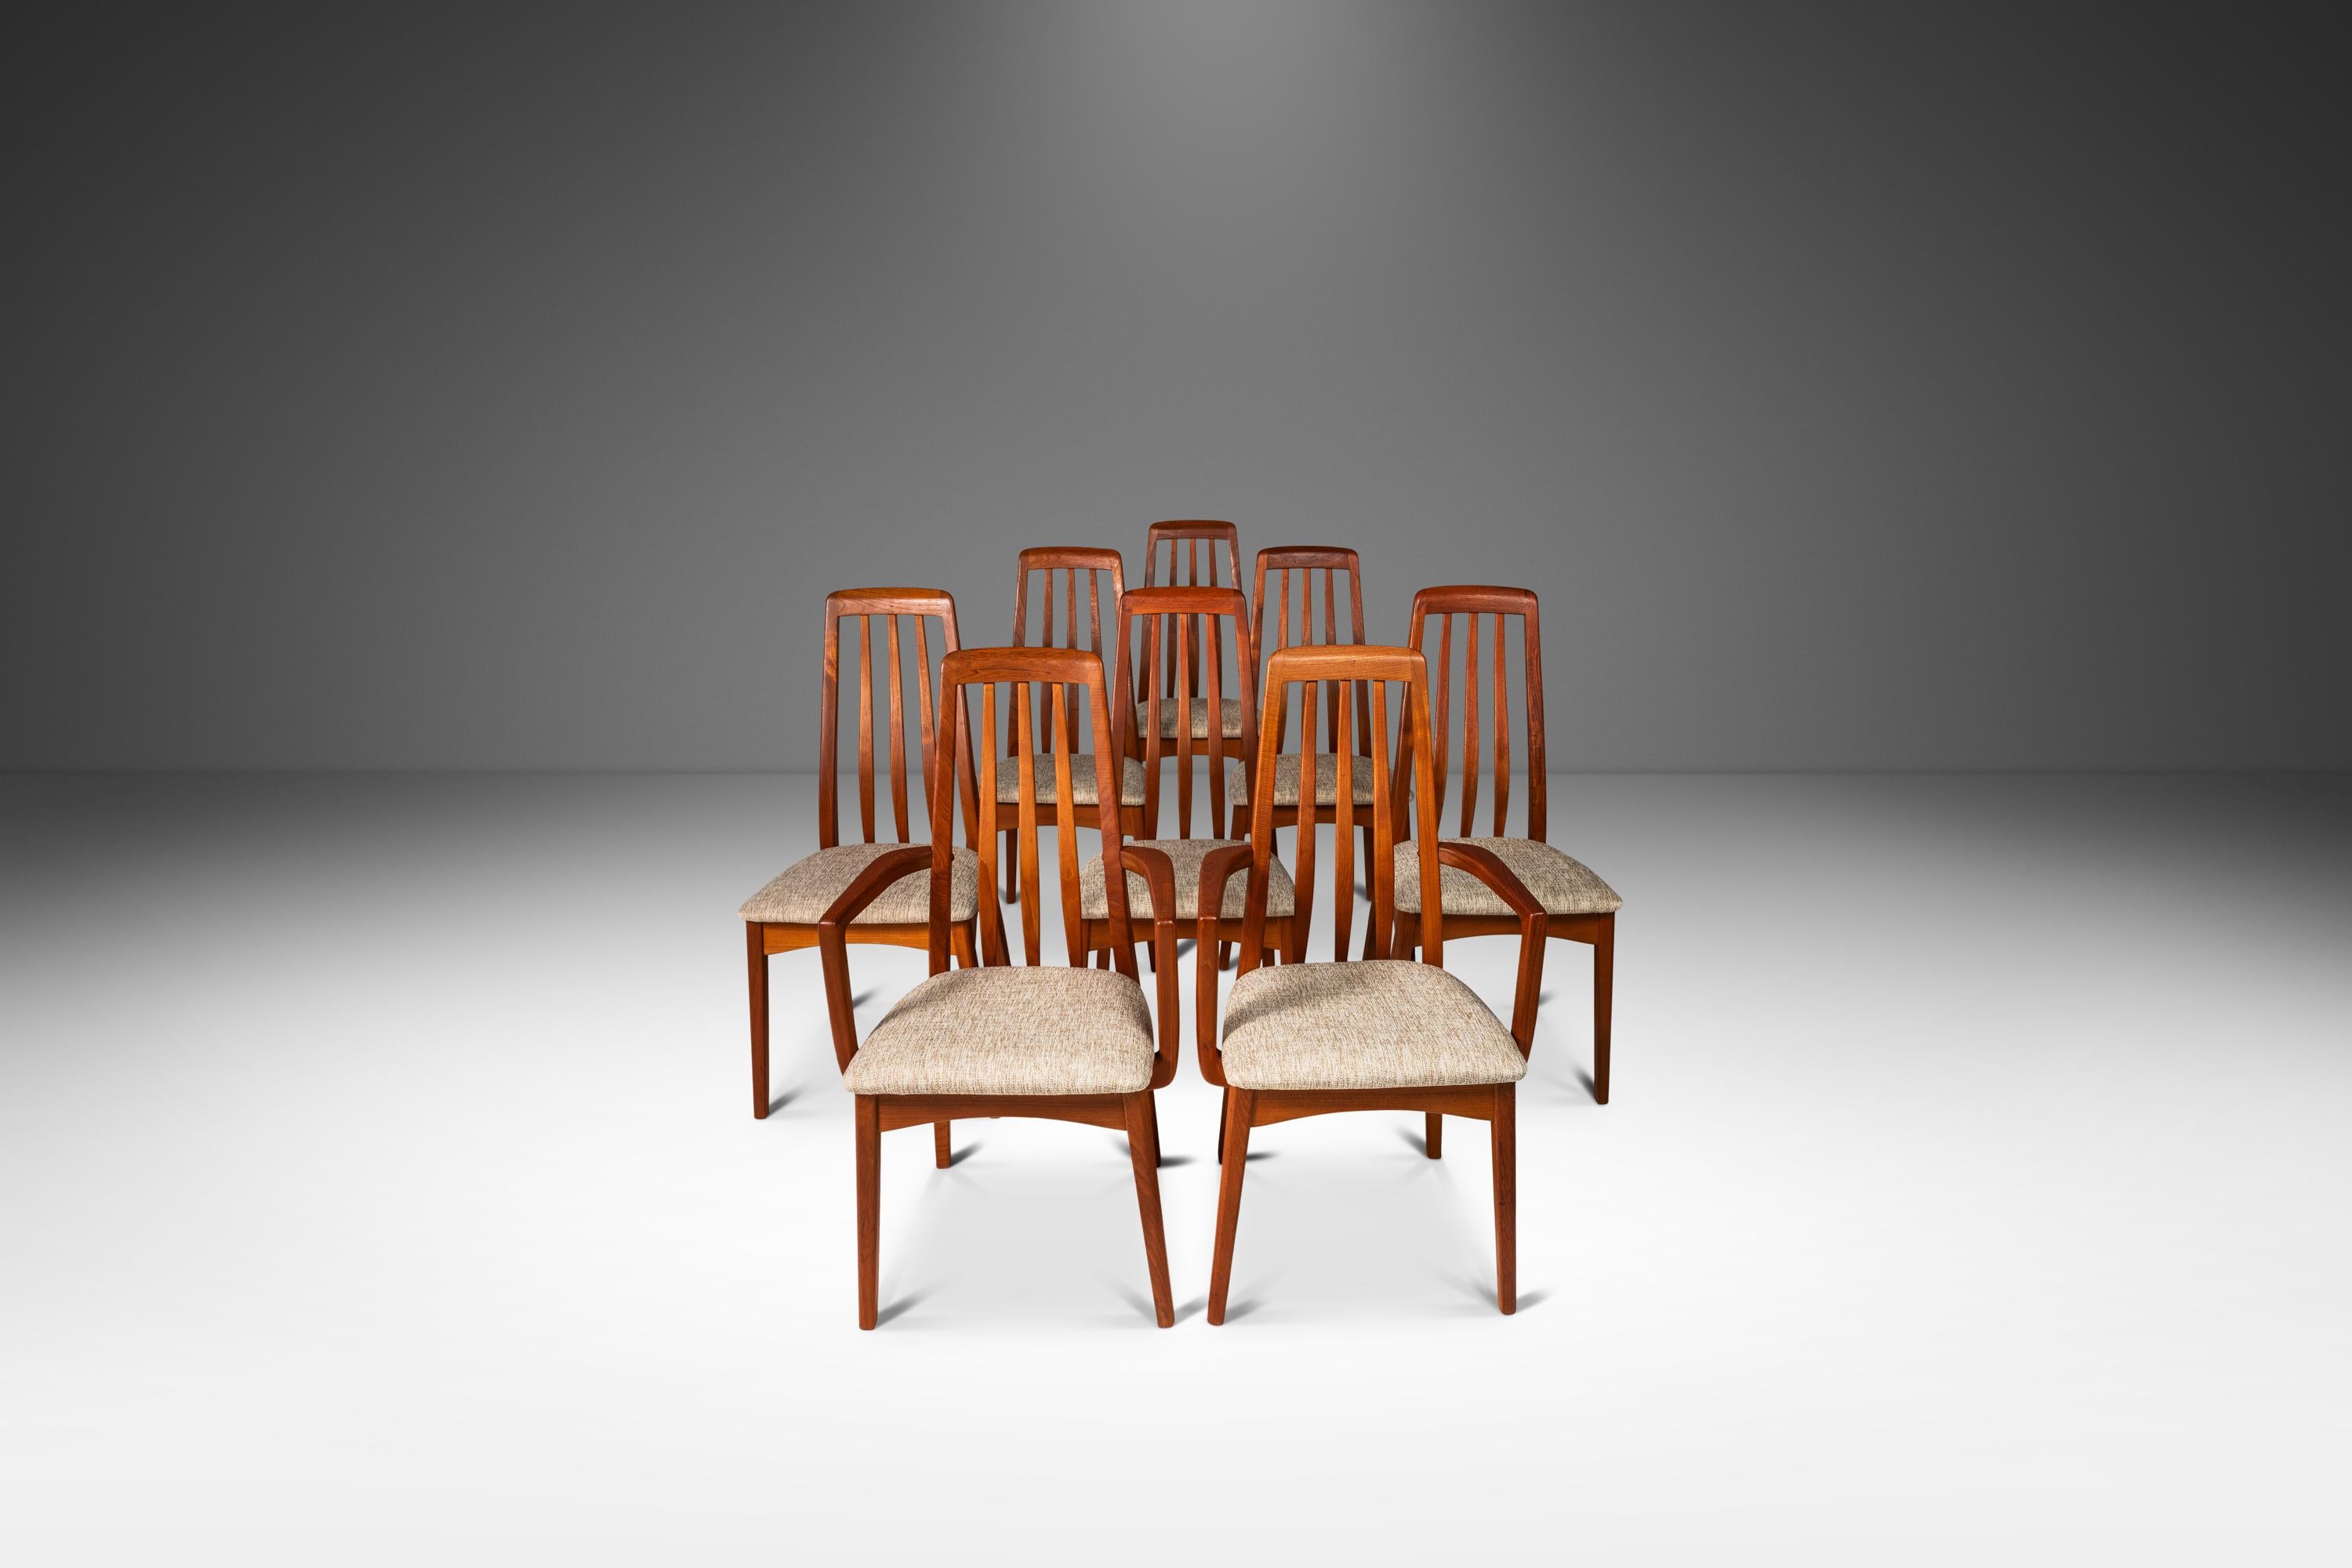  Introducing an expansive set of eight beautifully sculpted Danish Modern teak dining chairs designed by Benny Linden for Benny Linden Design. These superbly crafted and sculpted modern teak dining chairs with curved backrests feature new medium